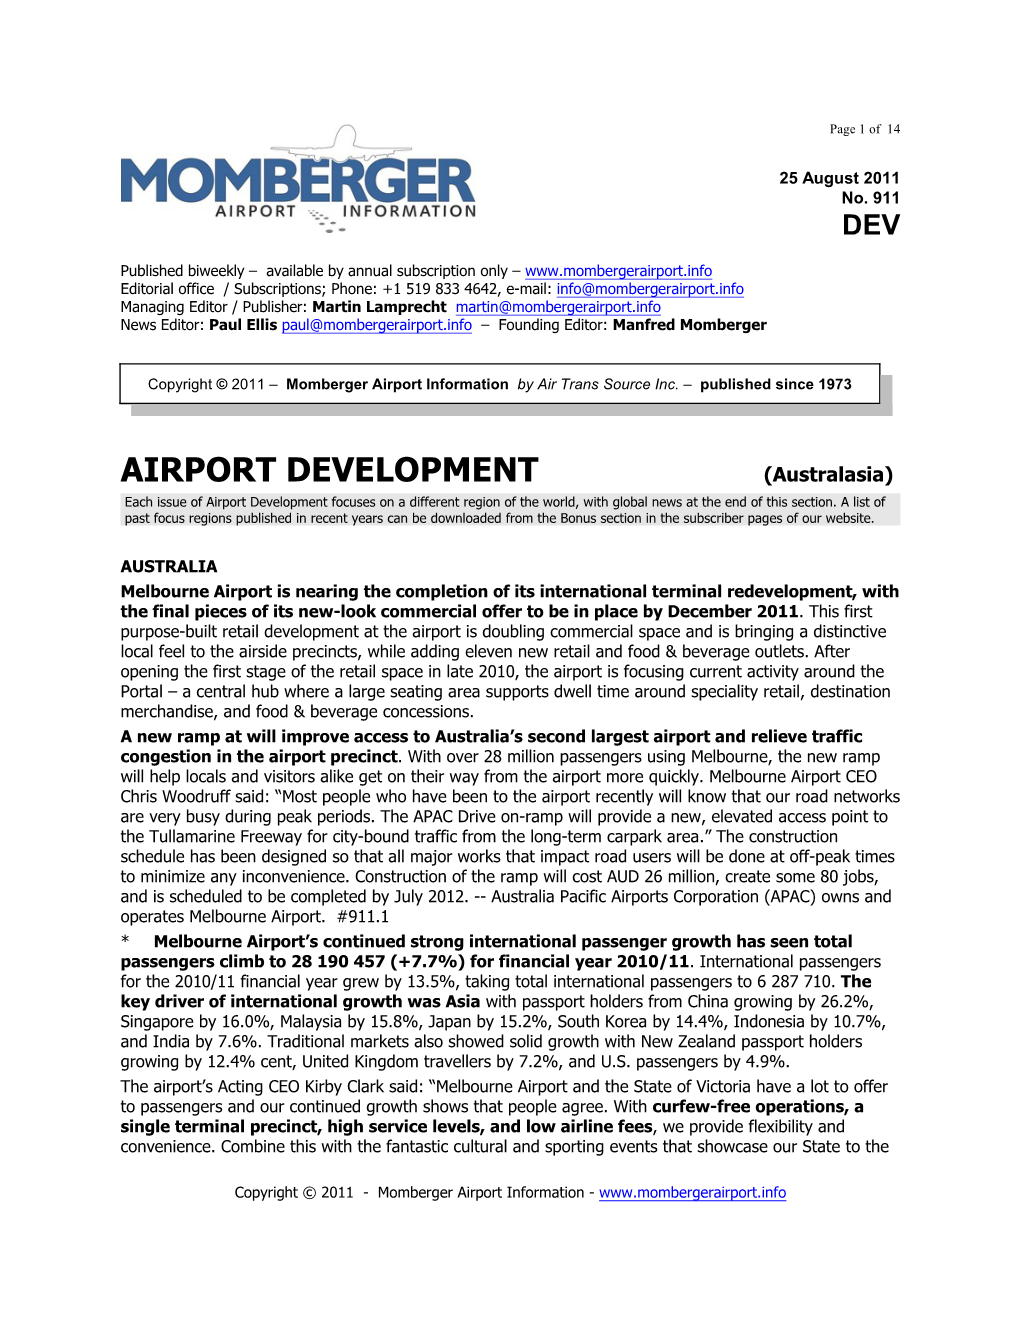 AIRPORT DEVELOPMENT (Australasia) Each Issue of Airport Development Focuses on a Different Region of the World, with Global News at the End of This Section